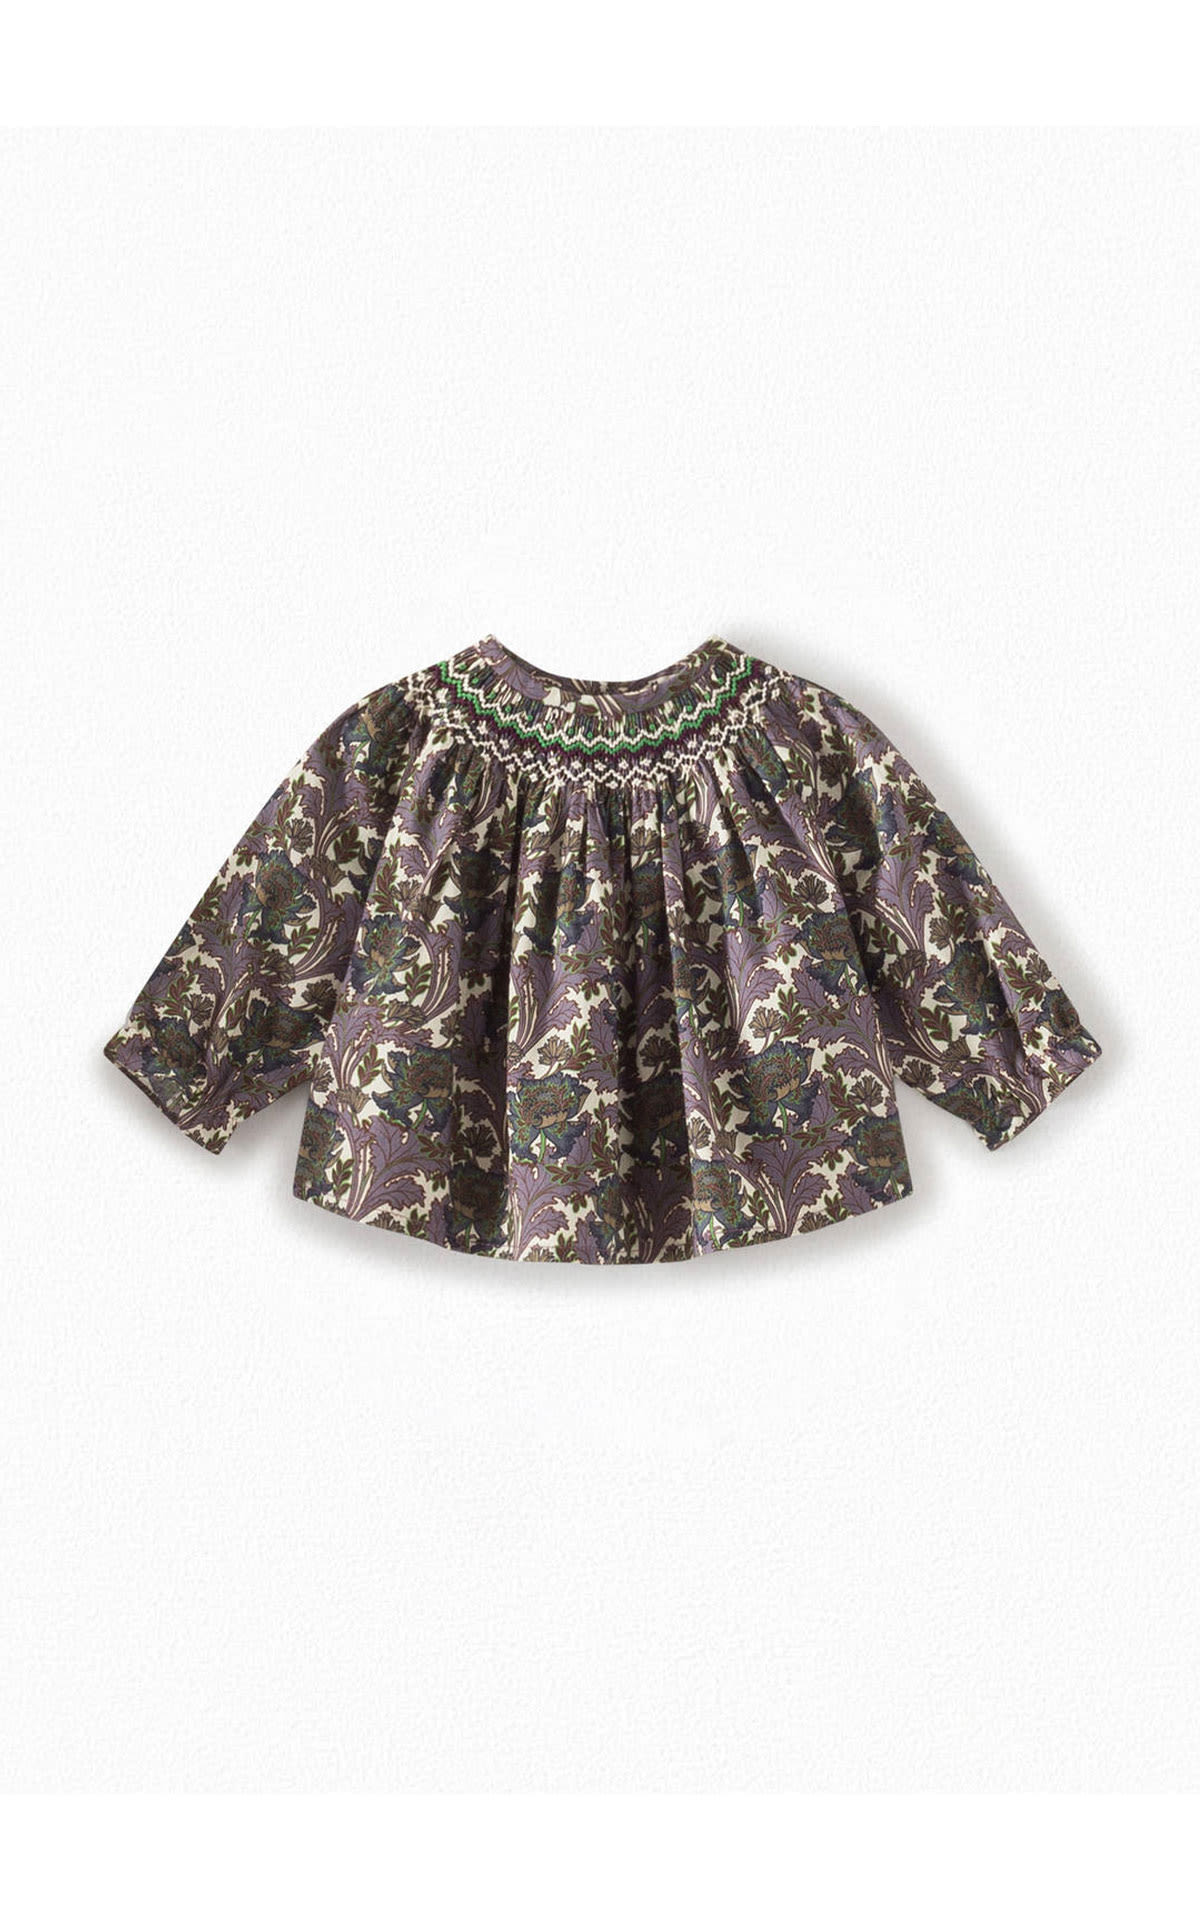 Bonpoint Baby blouse from Bicester Village